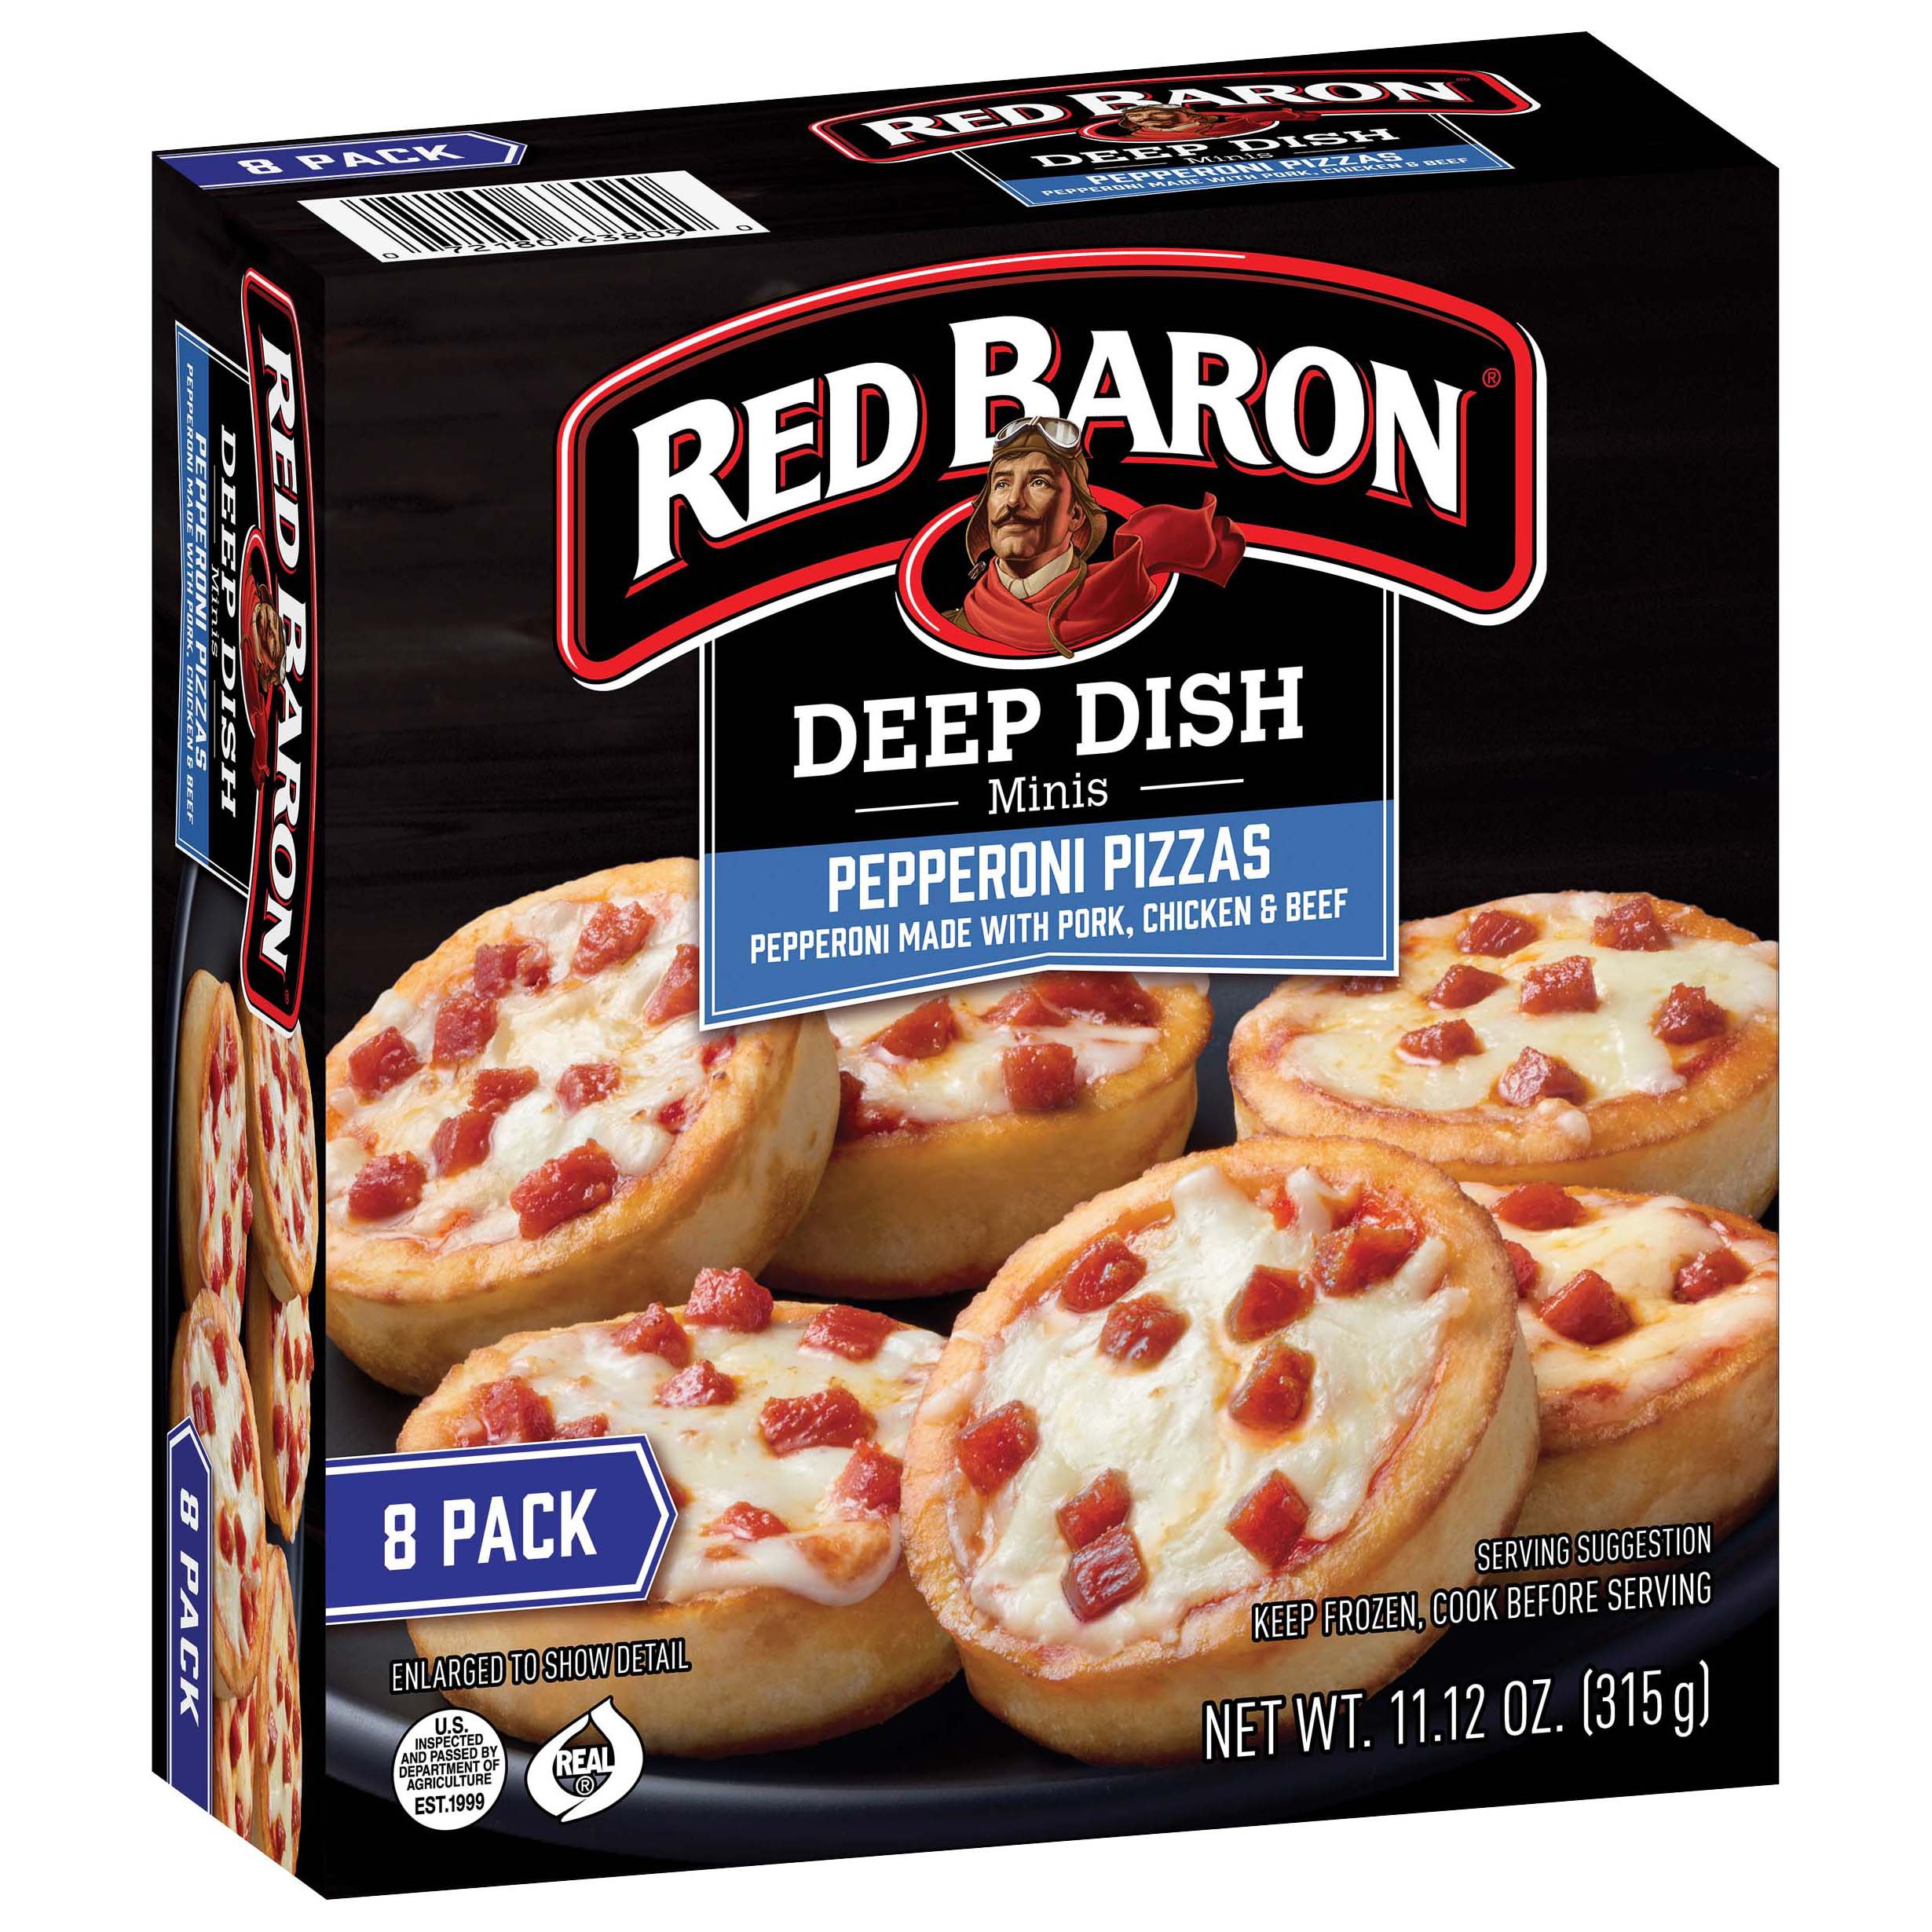 Red Baron Deep Dish Minis Pepperoni Pizzas - Shop Red ...